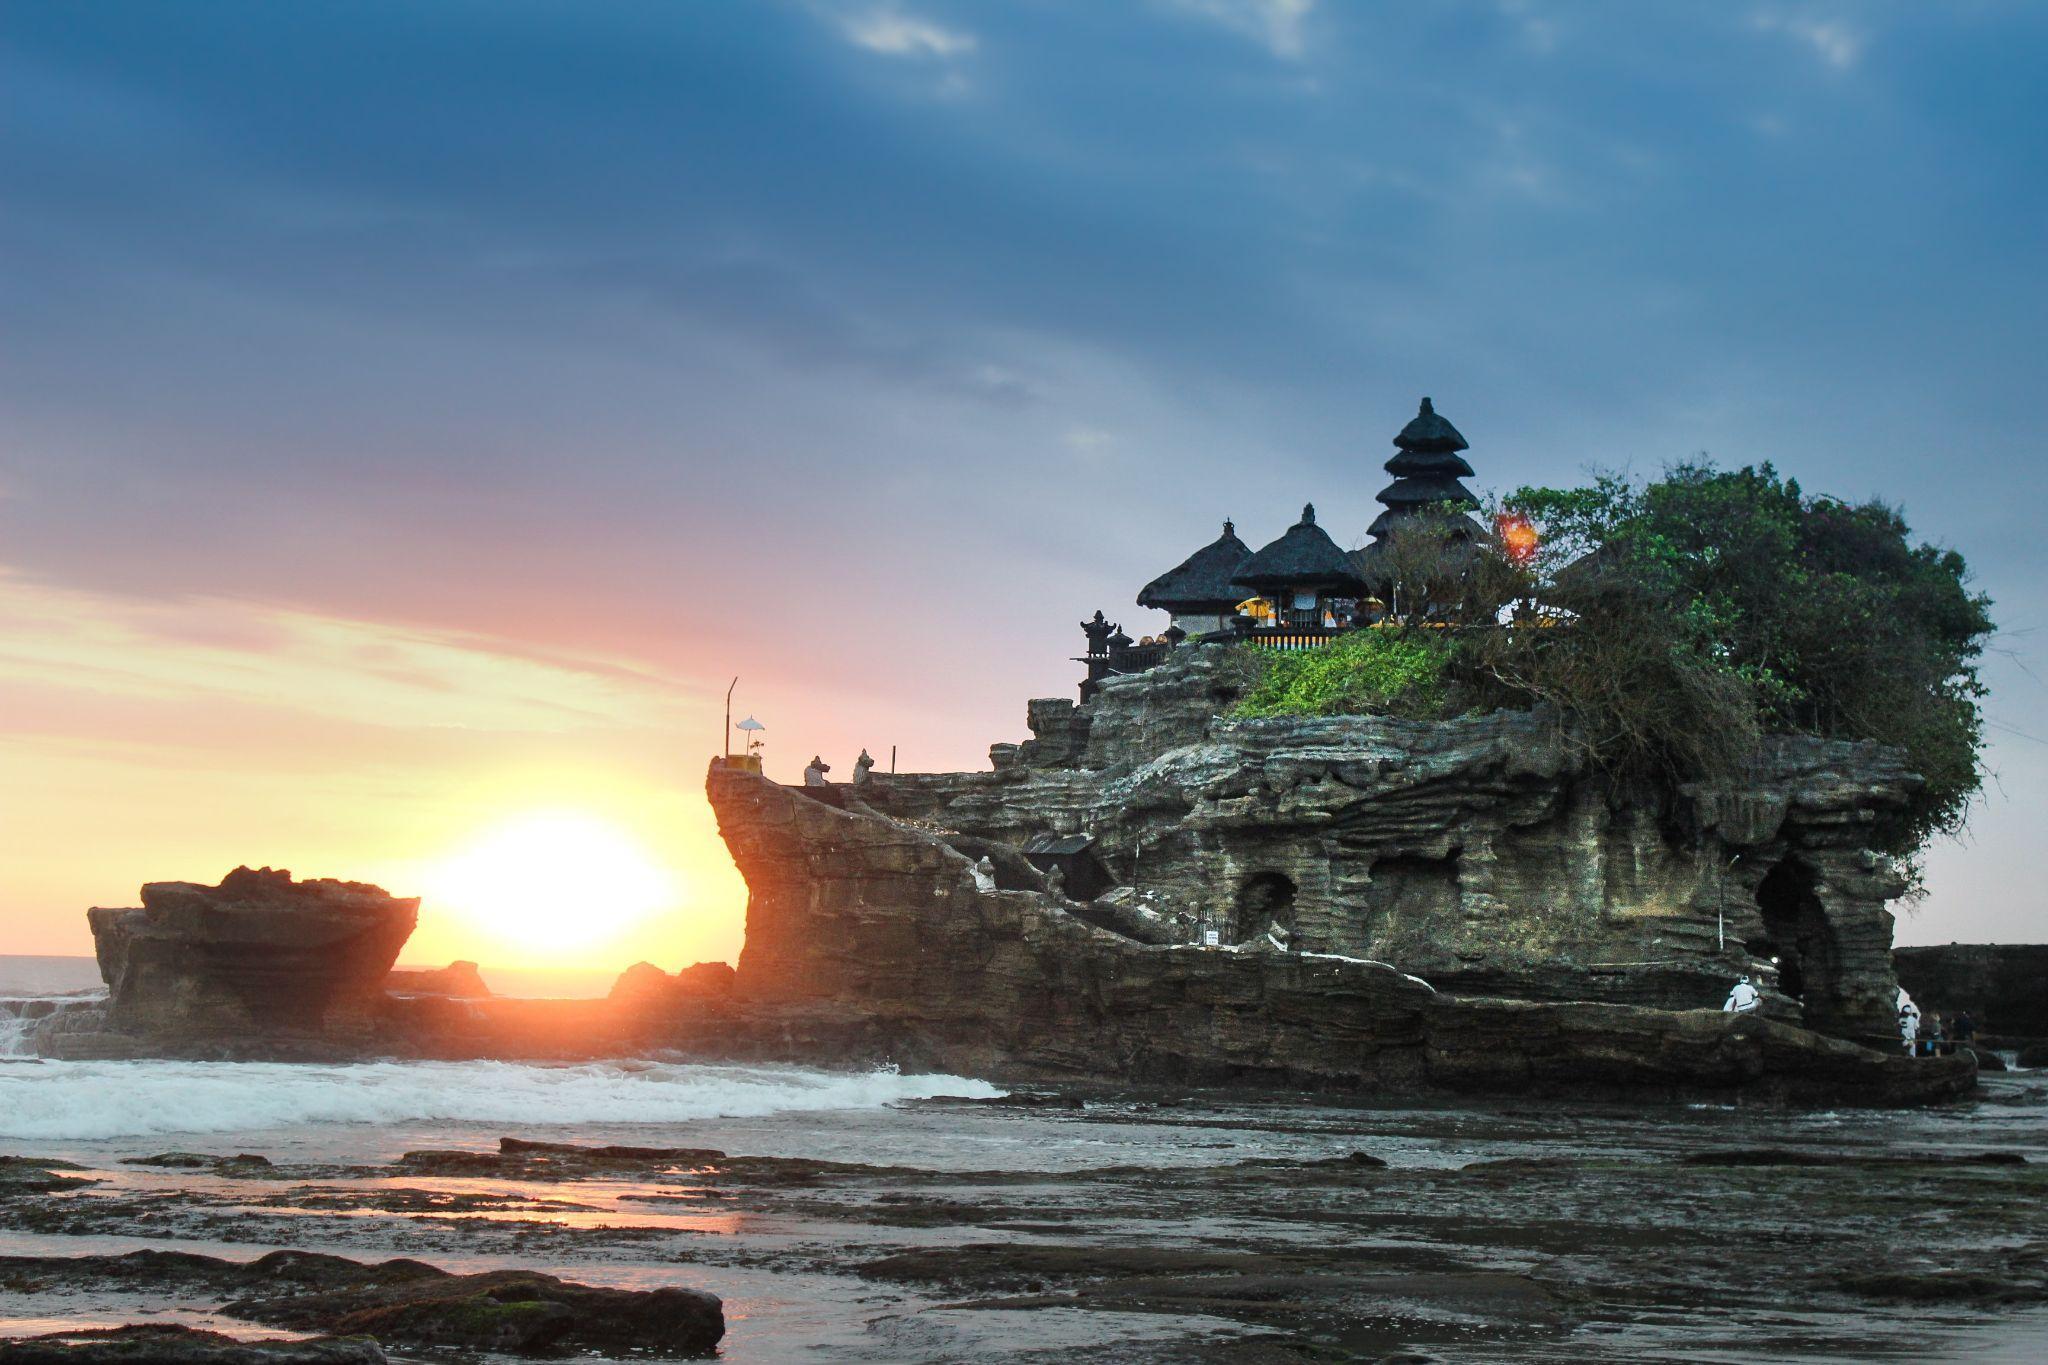 An image of a Temple in Bali which should be everyone’s dream destination